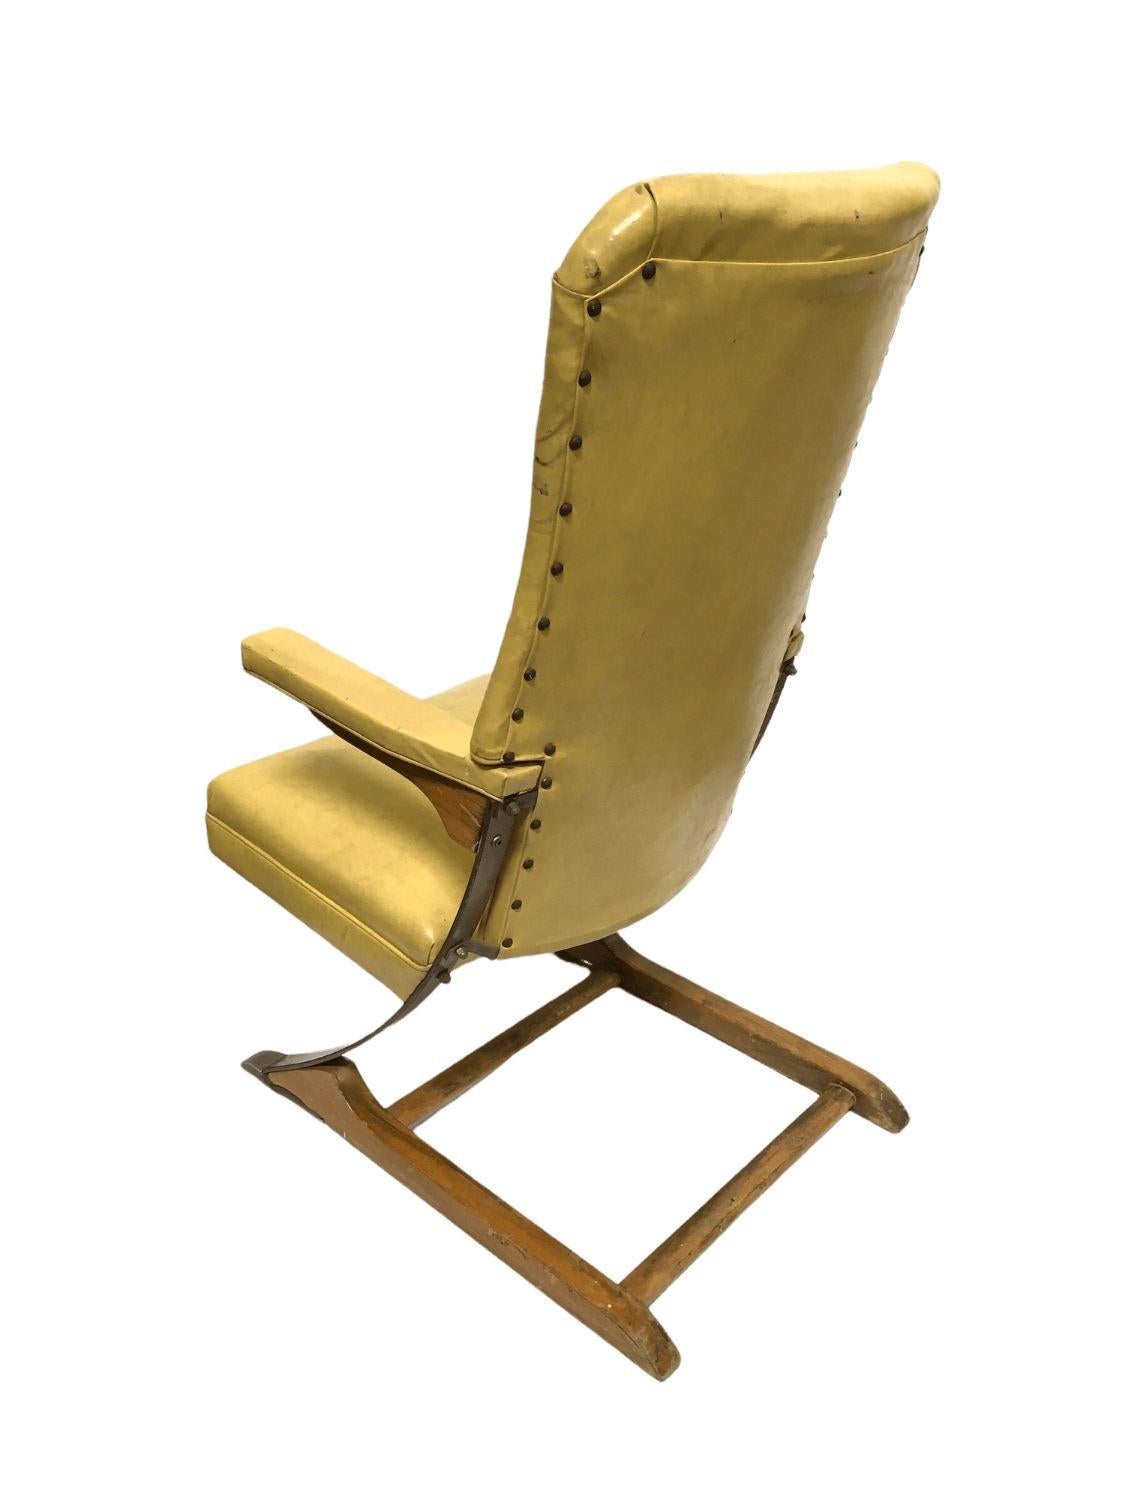 20th Century Vintage Rock-a-Chair Cantilever Rocker Chair in Harvest Gold Vinyl For Sale